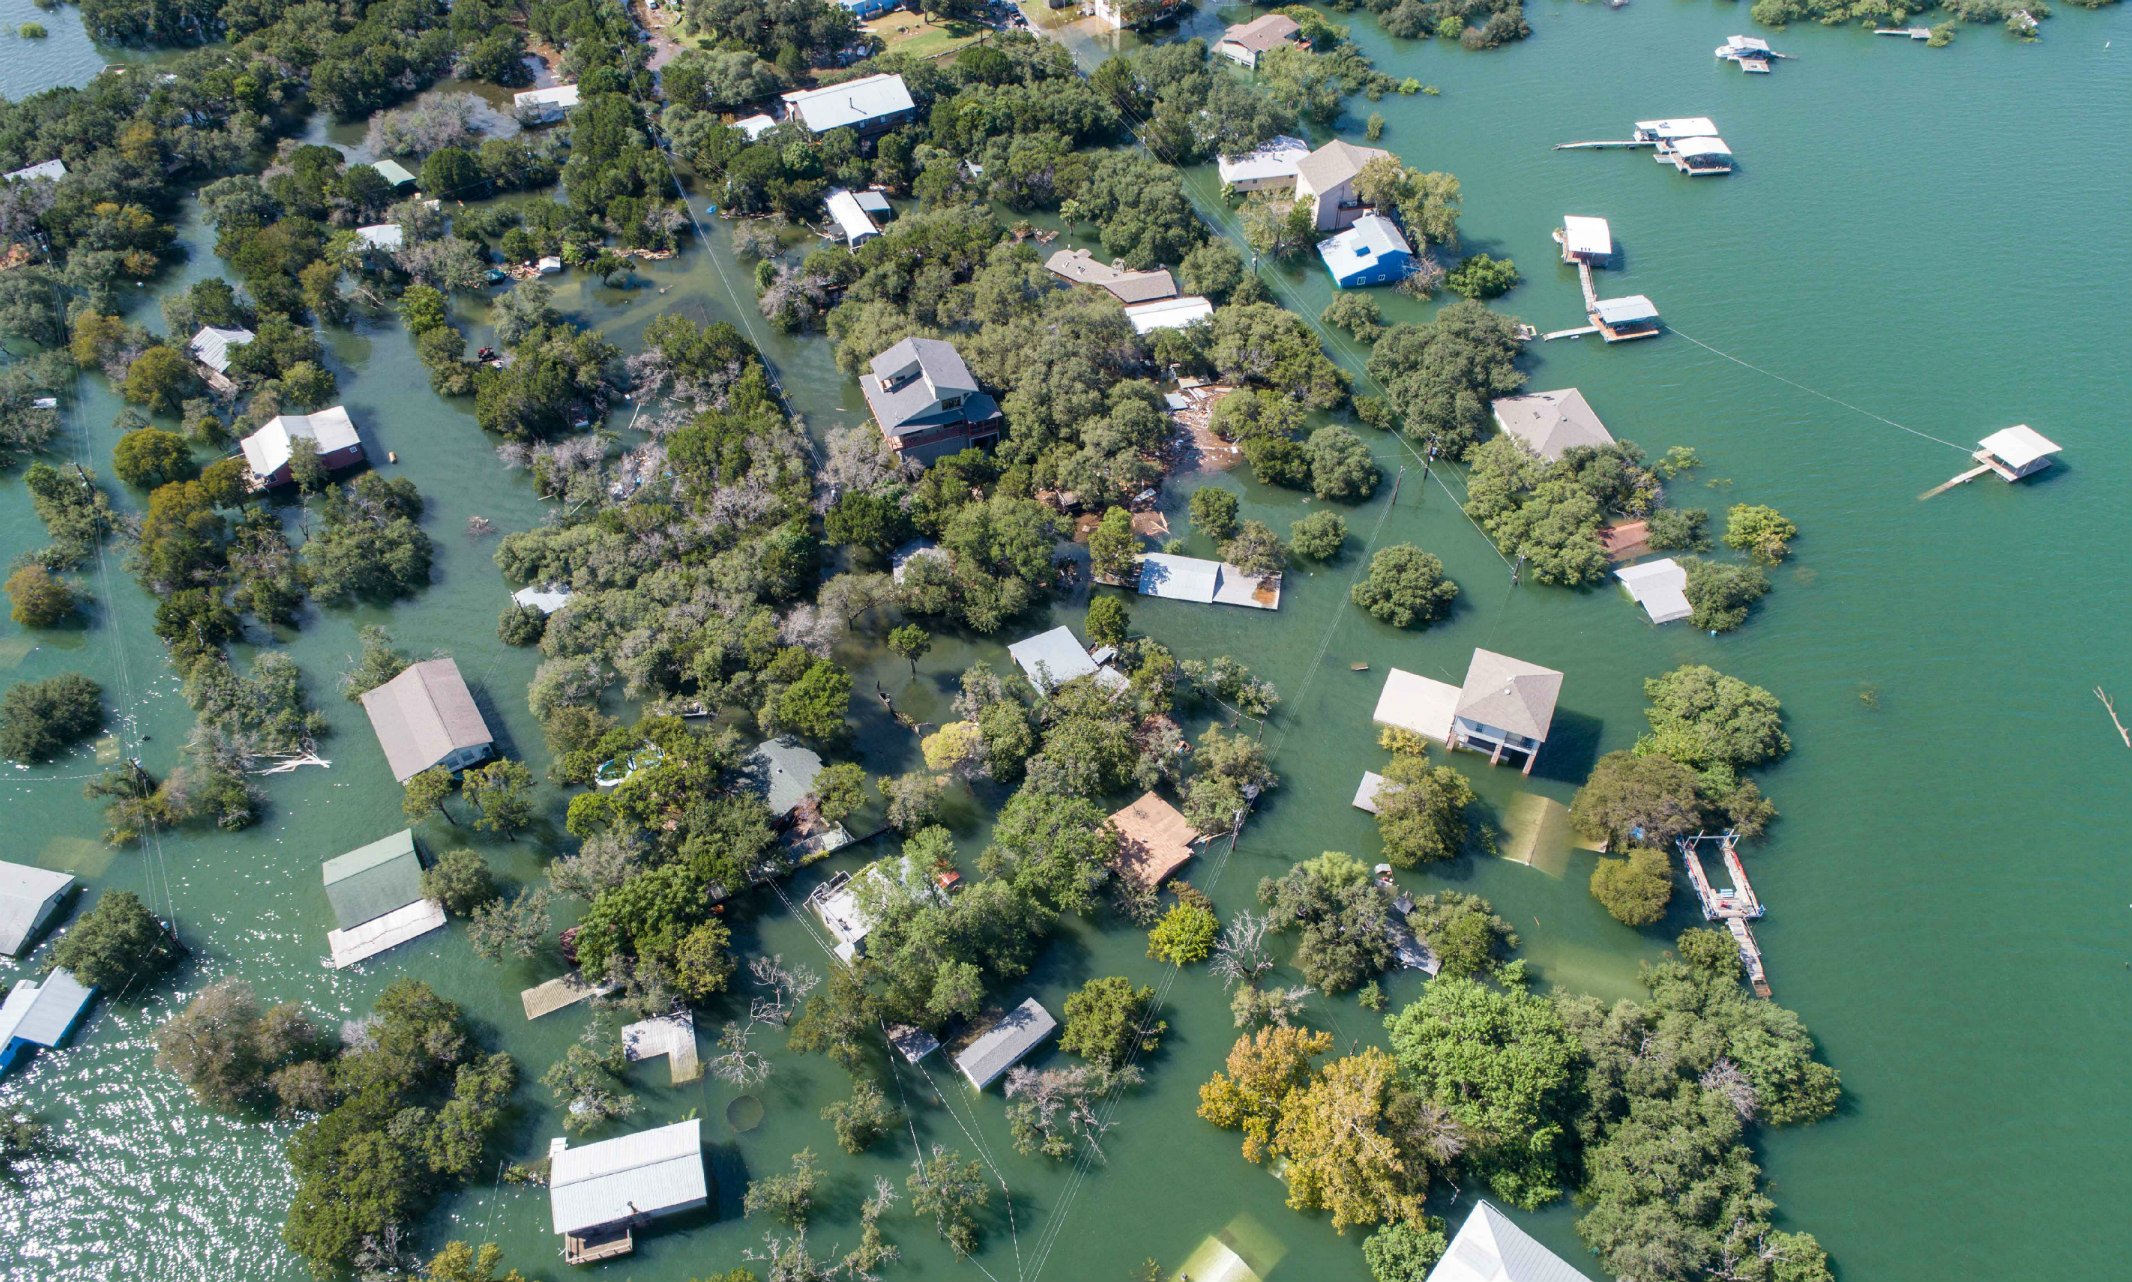 Aerial image of a flooded neighborhood with lots of houses and trees 